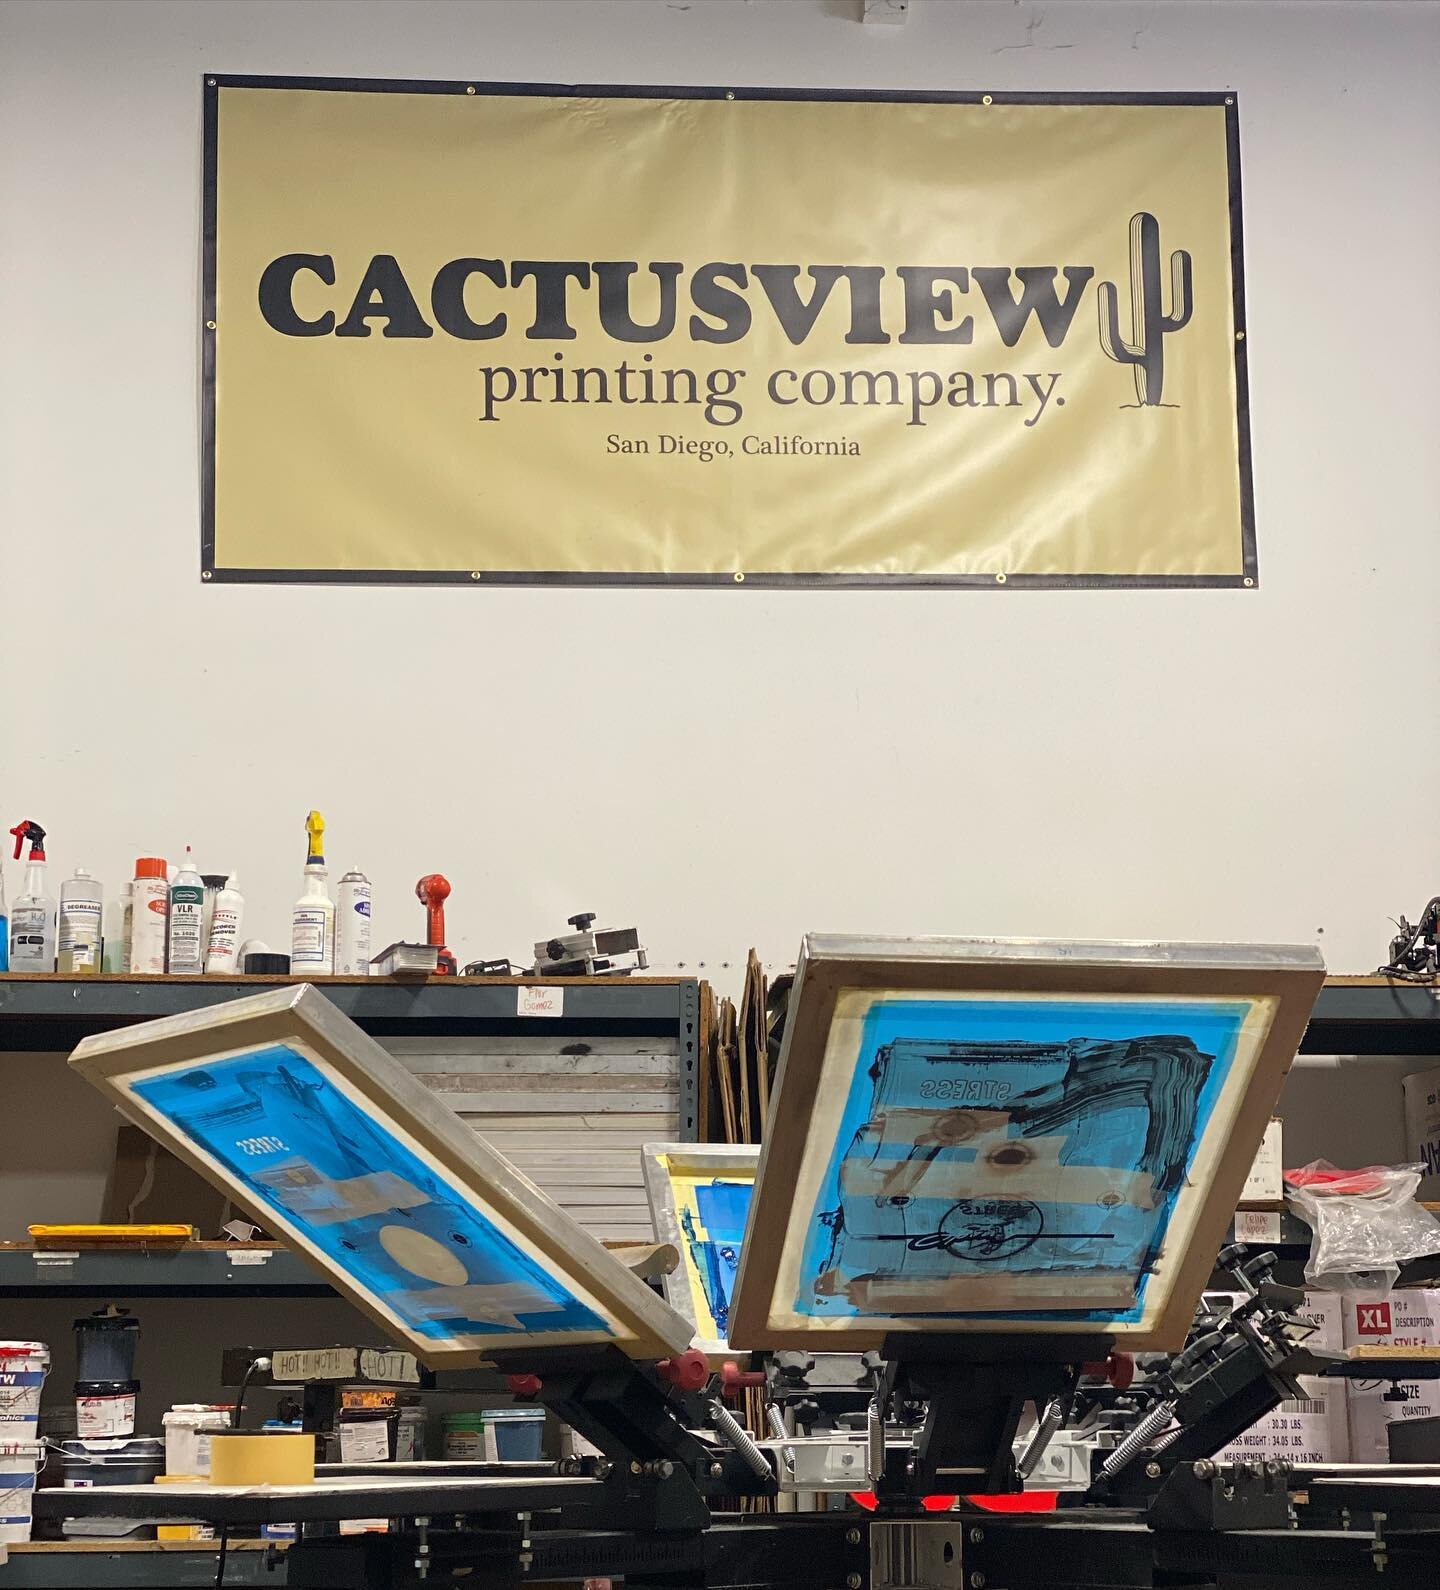 Cactusview Printing Company
6585 Osler St. Suite 101
San Diego, California 92111

#ScreenPrinting
#Embroidery
#Sublimation
#CustomPrinting